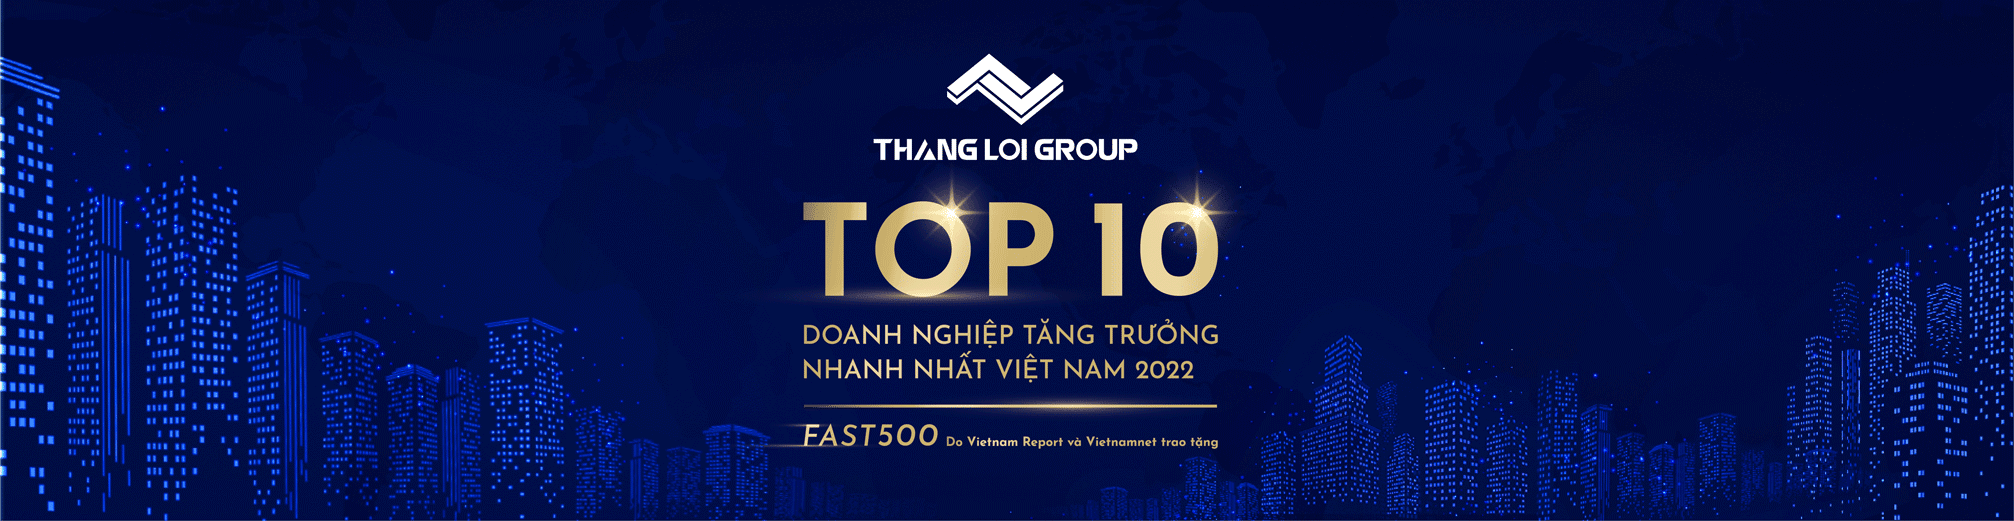 thắng lợi group